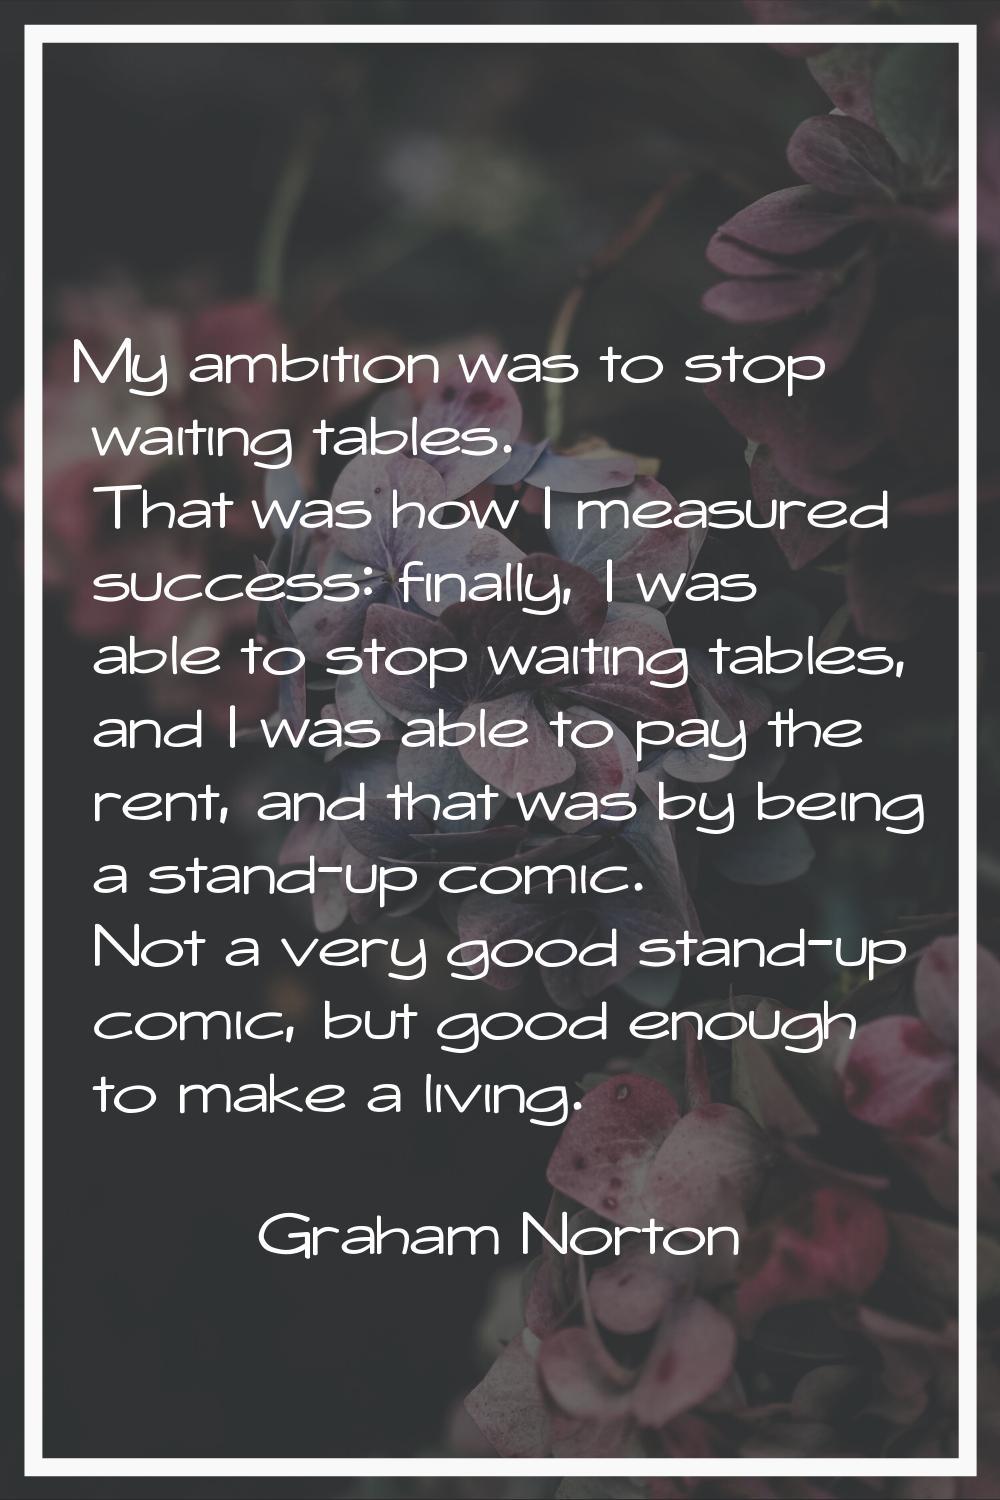 My ambition was to stop waiting tables. That was how I measured success: finally, I was able to sto